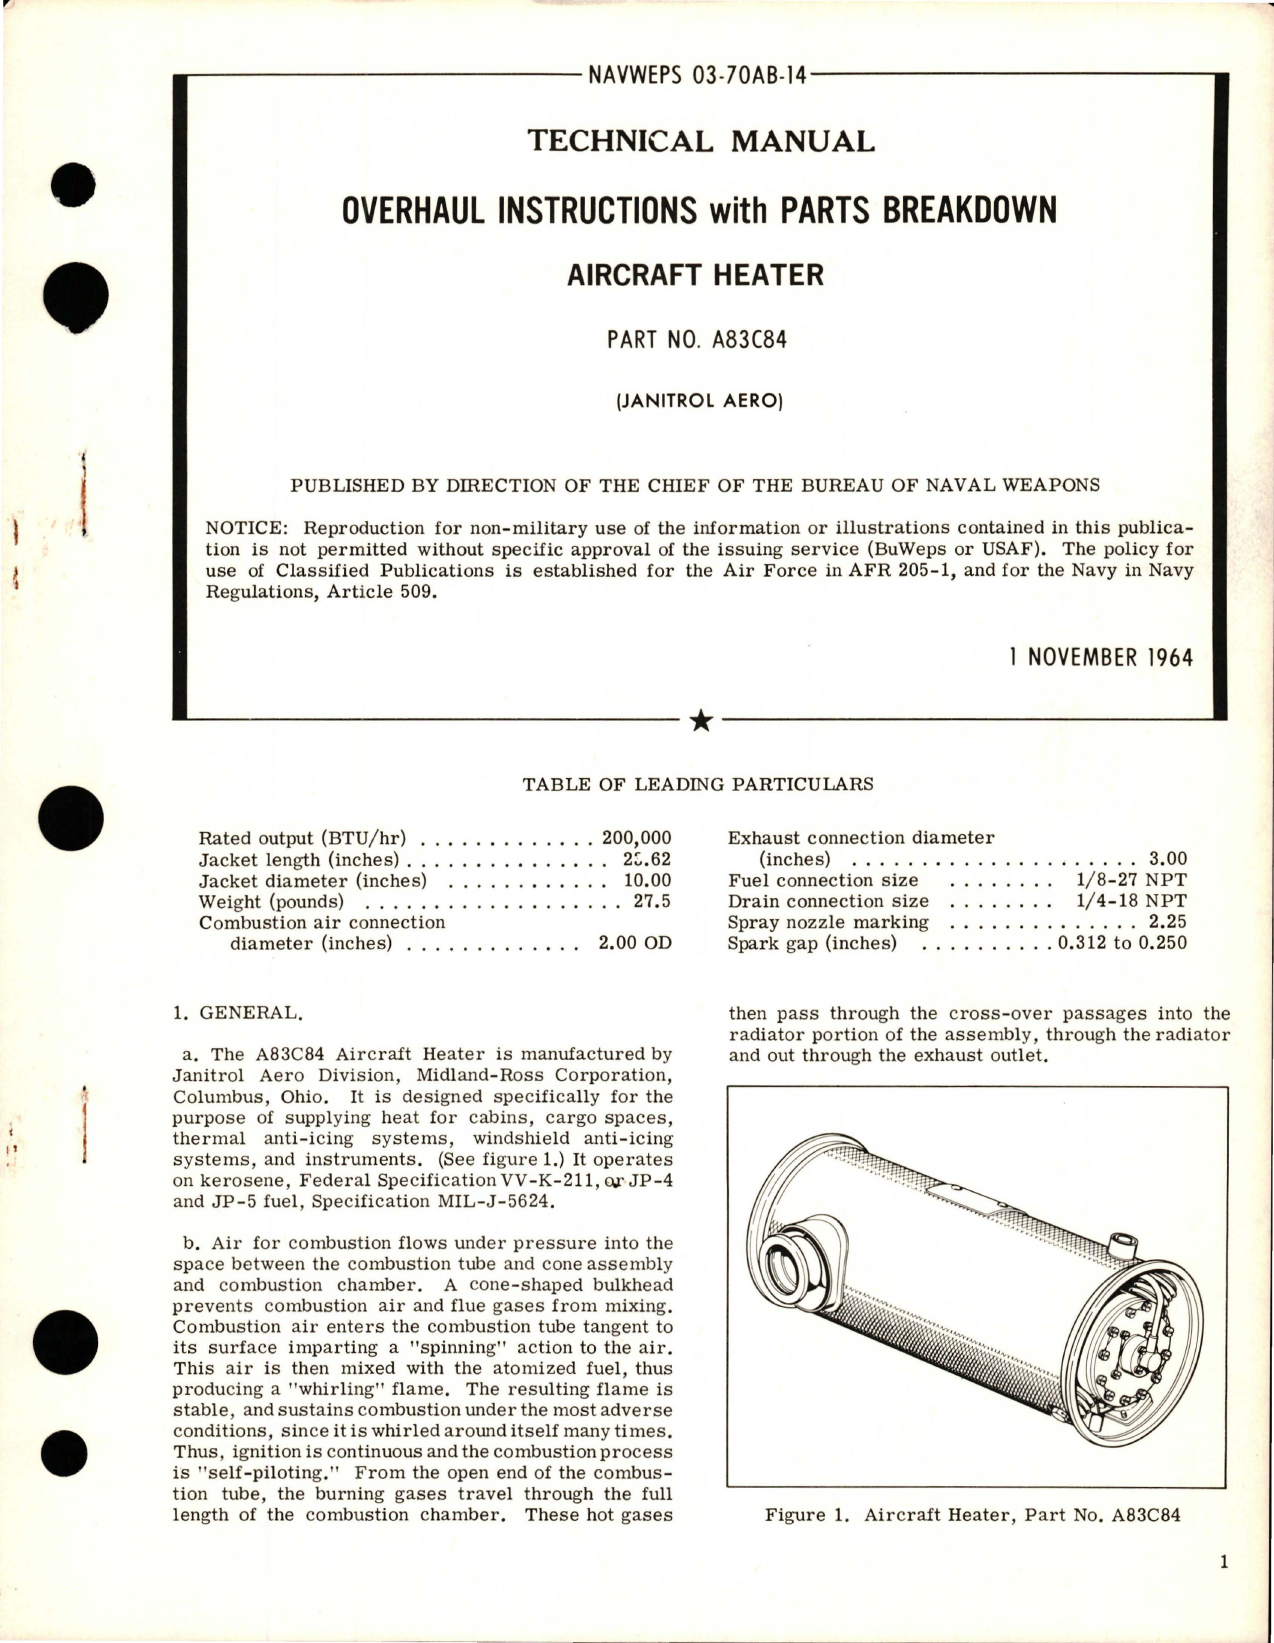 Sample page 1 from AirCorps Library document: Overhaul Instructions with Parts Breakdown for Aircraft Heater - Part A83C84 